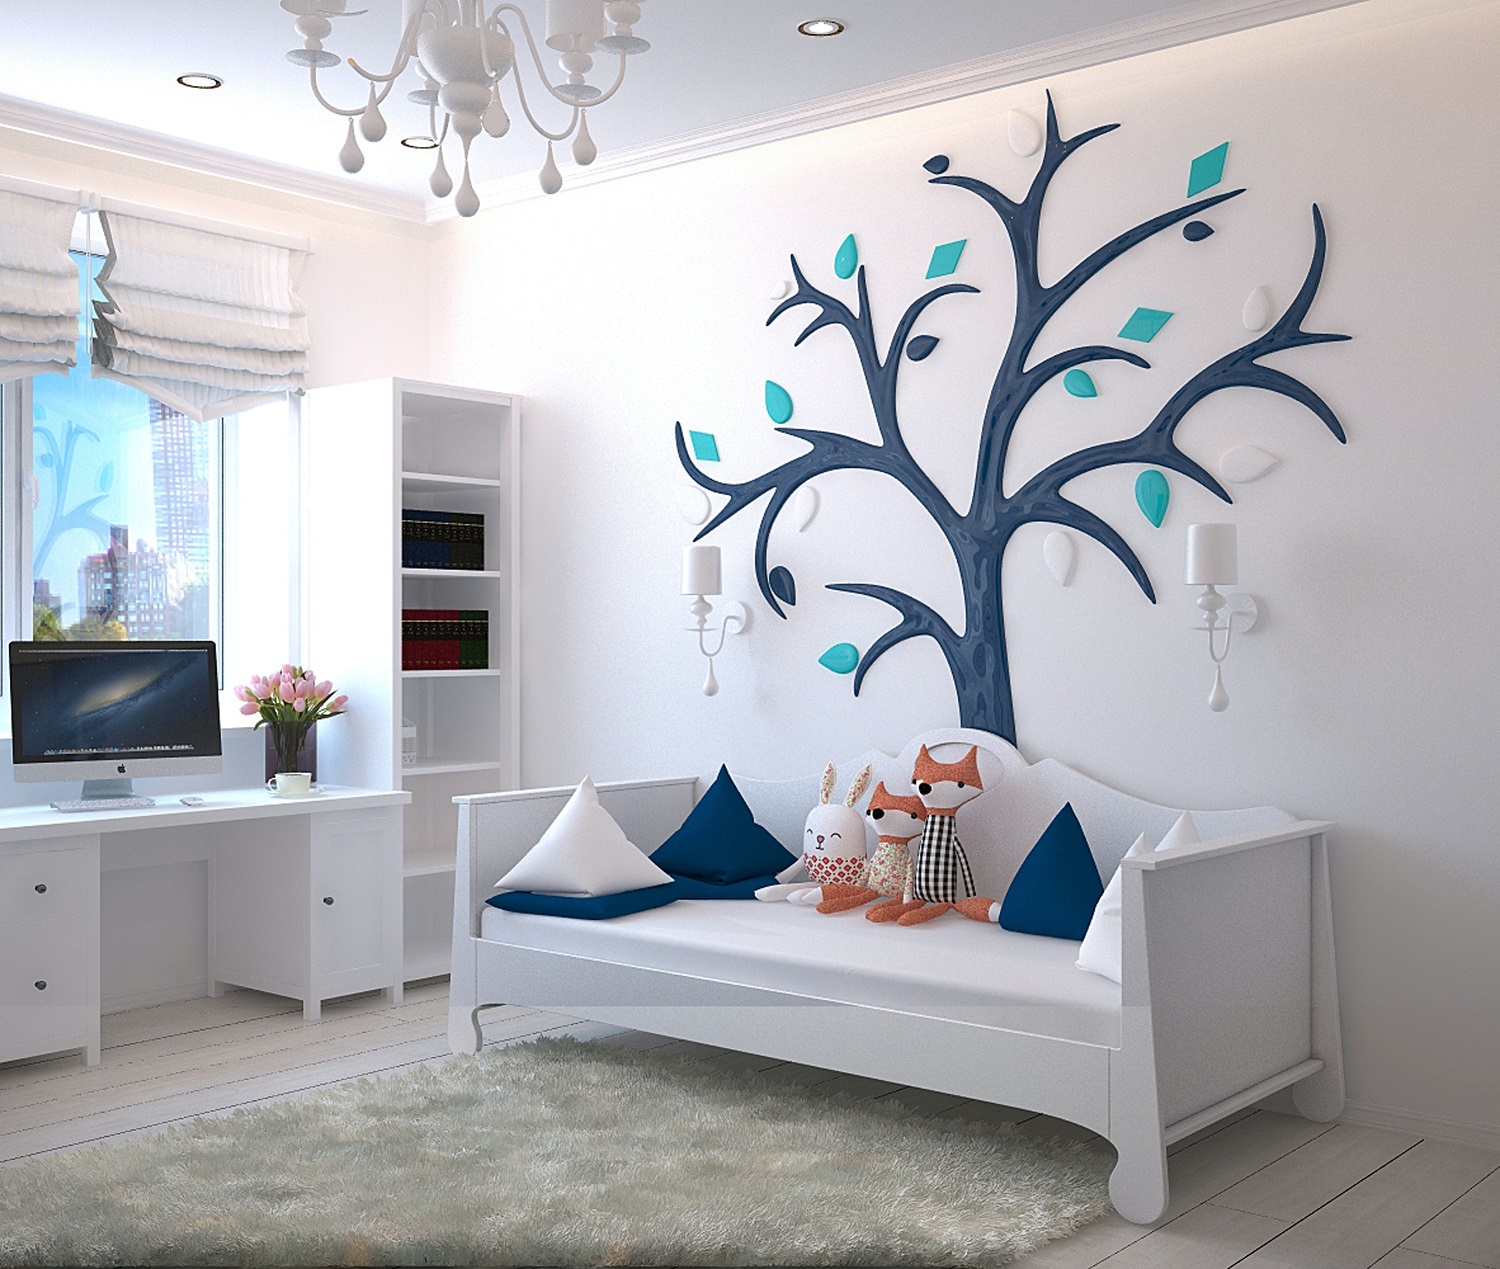 How to Choose the Right Colors for Your Children’s Rooms